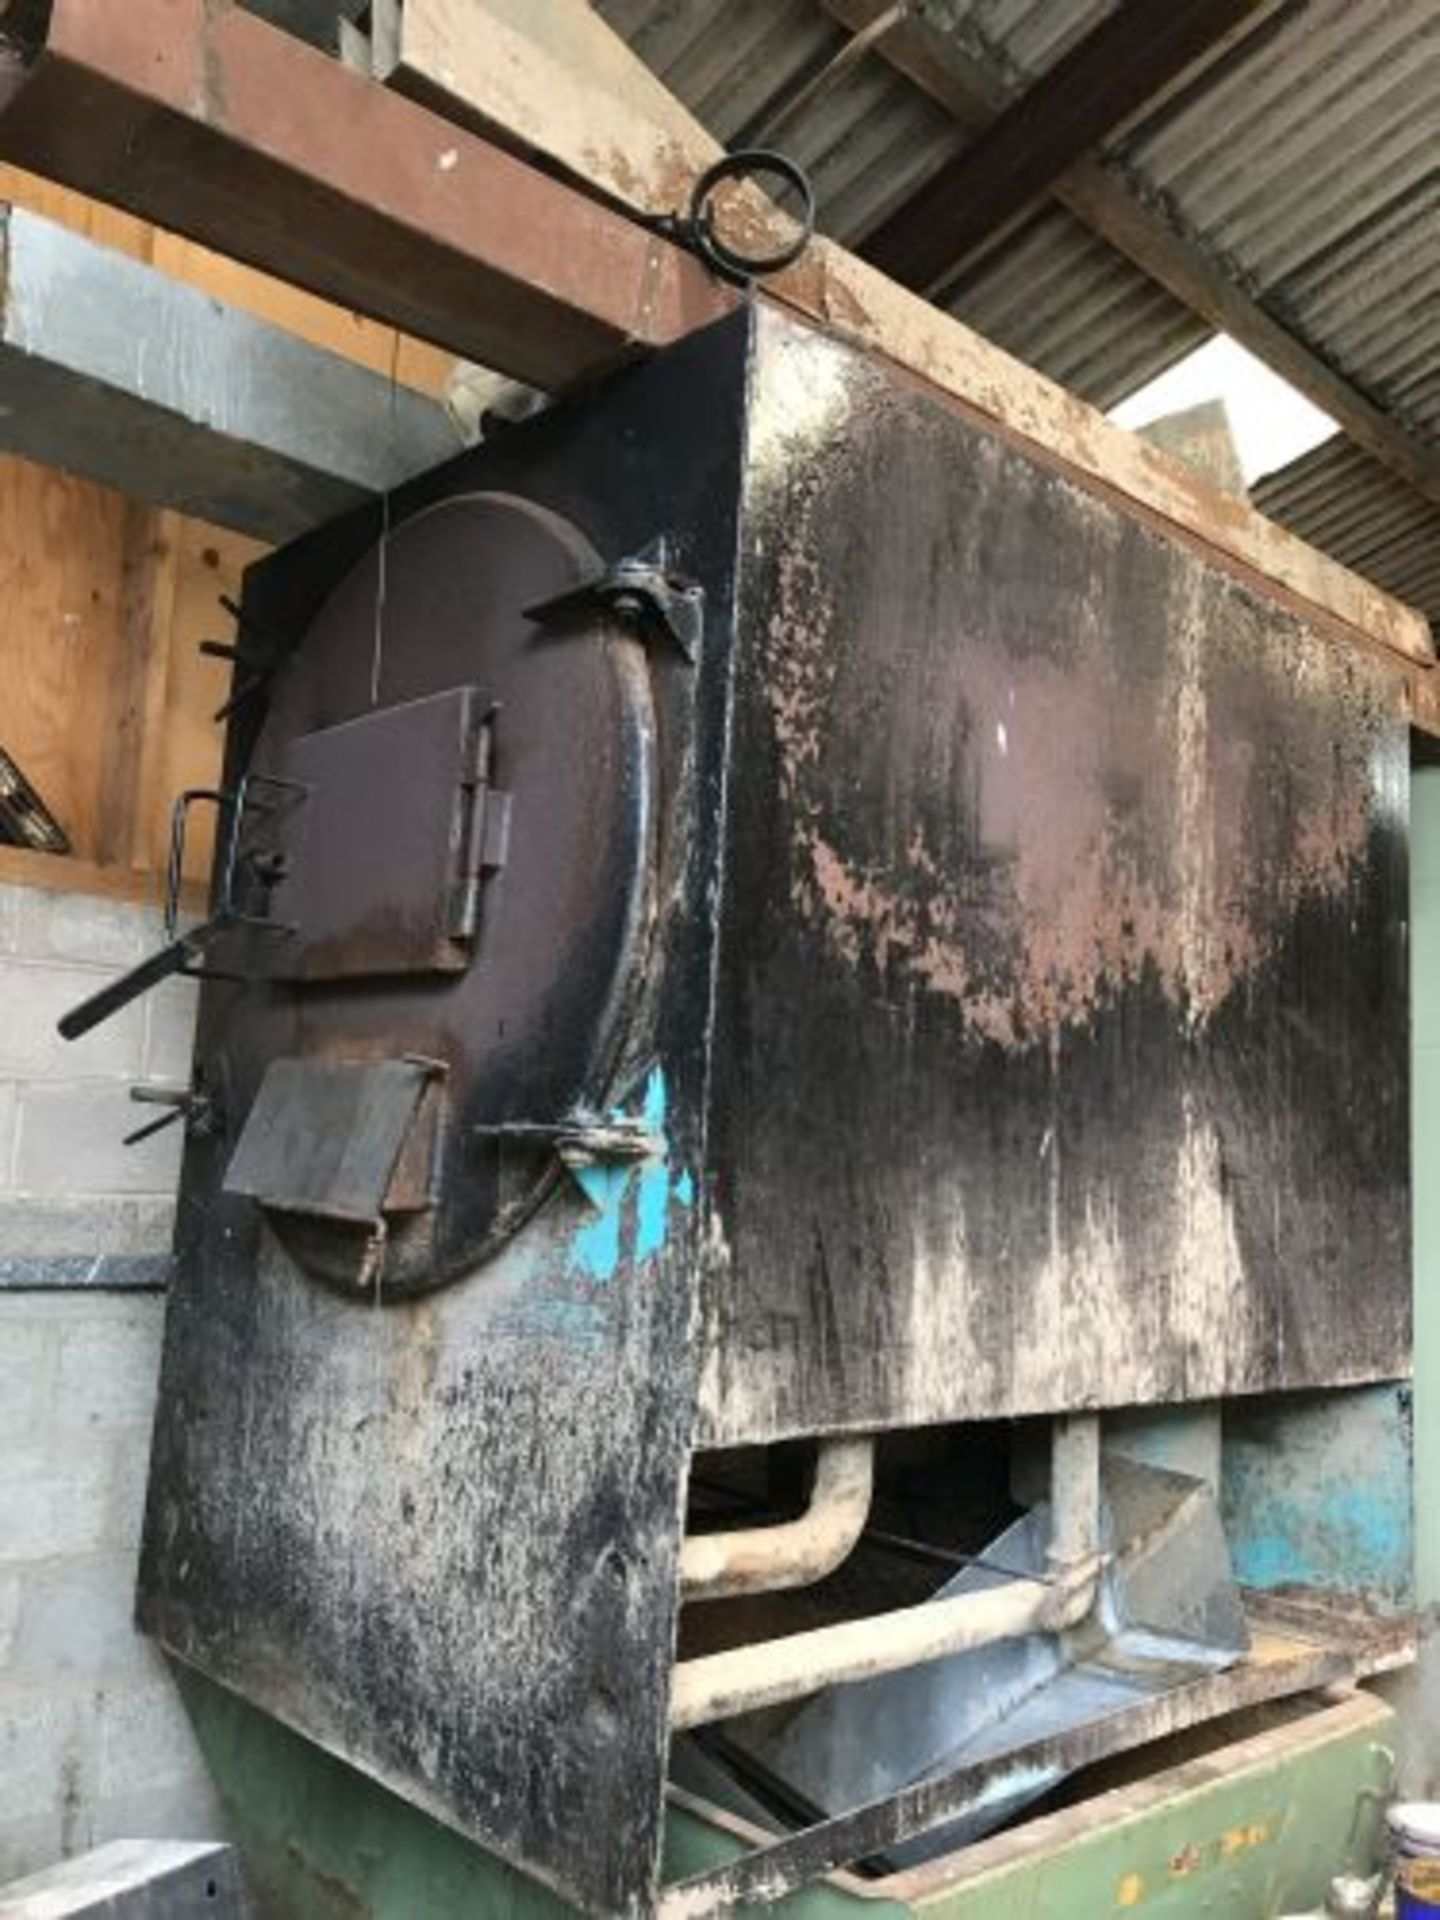 Wood Fired Heater, with large door and ducting